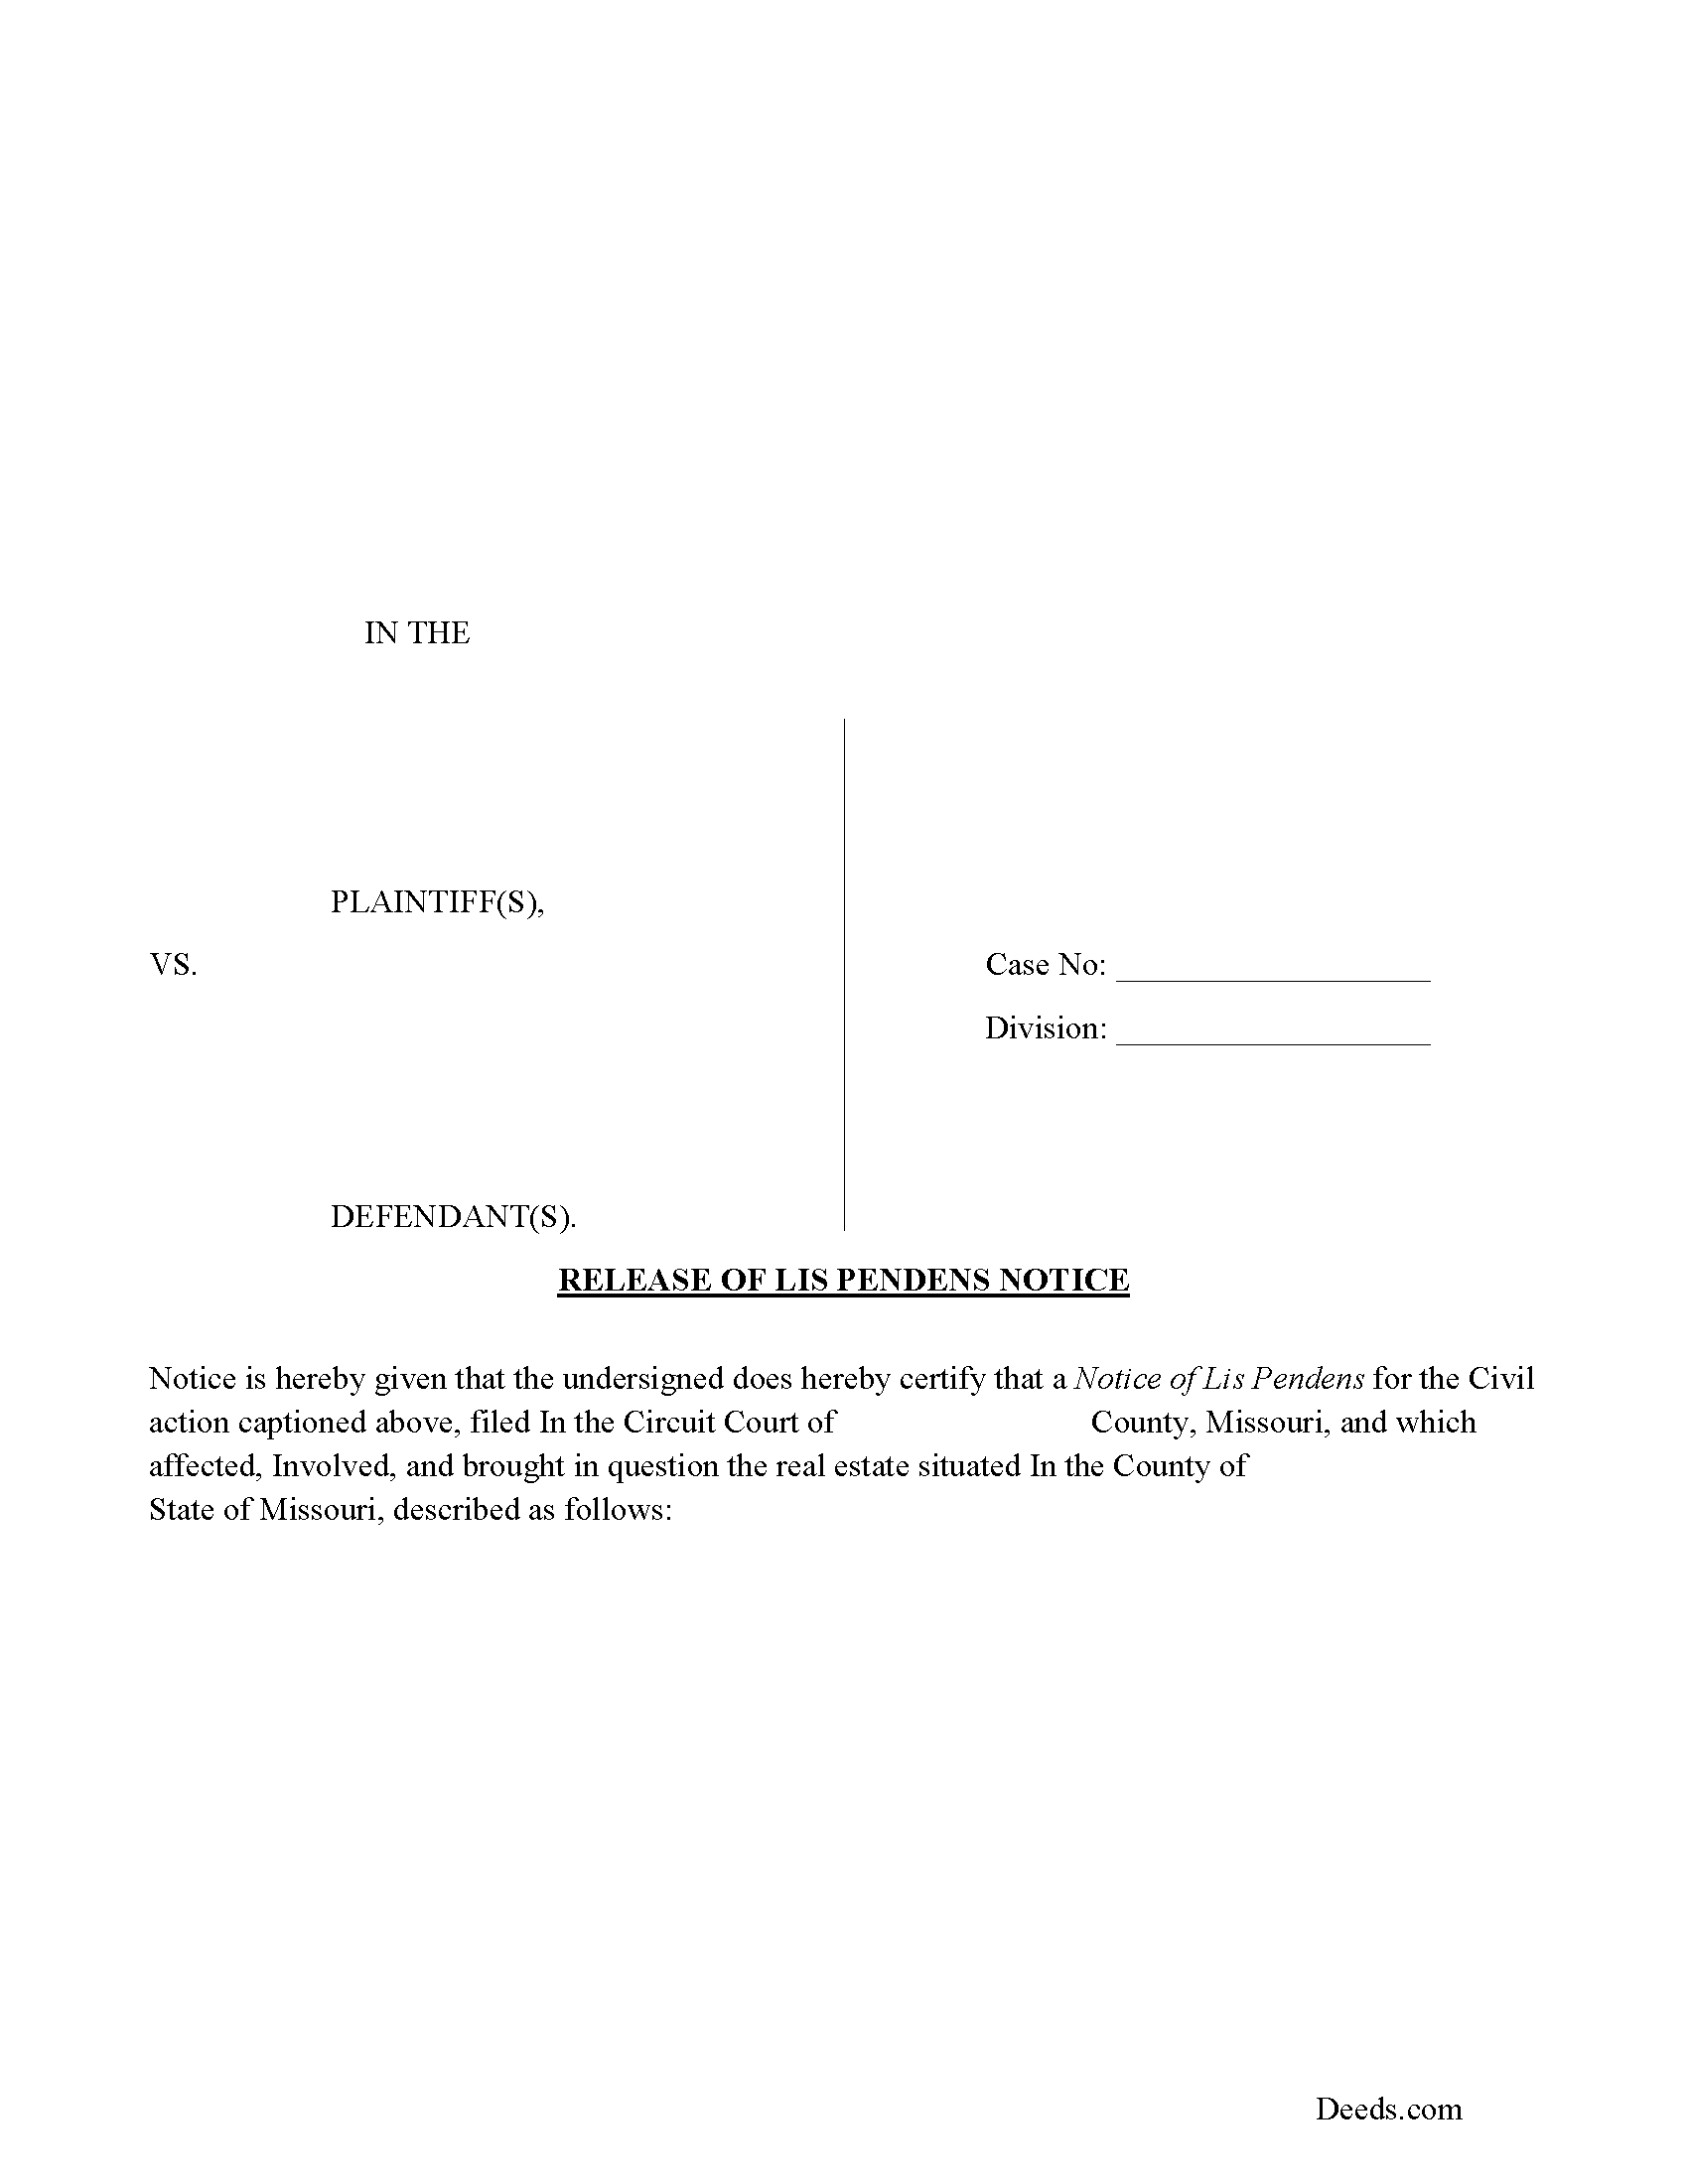 Release of Lis Pendens Notice Form